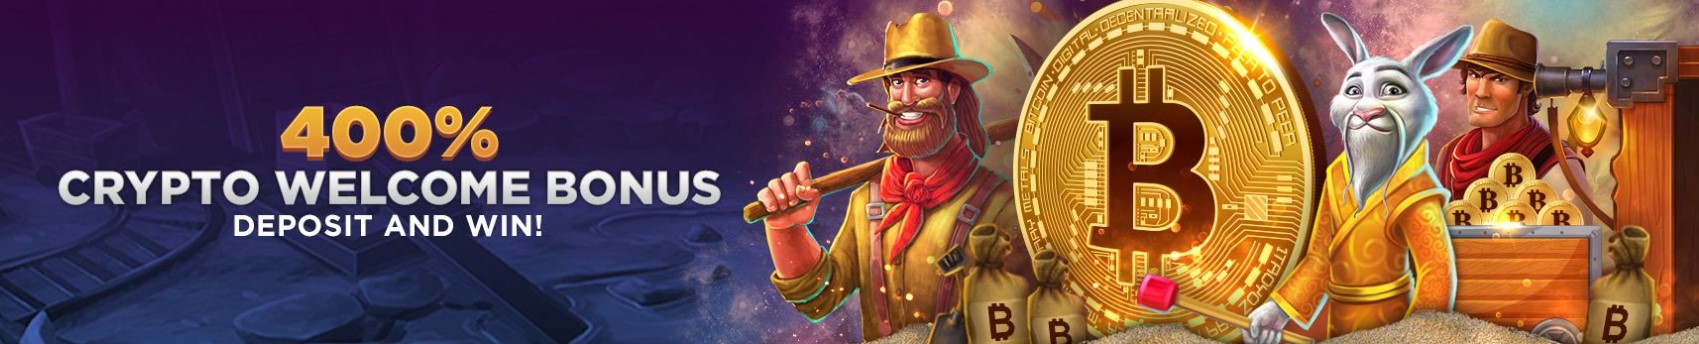 Super Slots Crypto Sign-Up offer